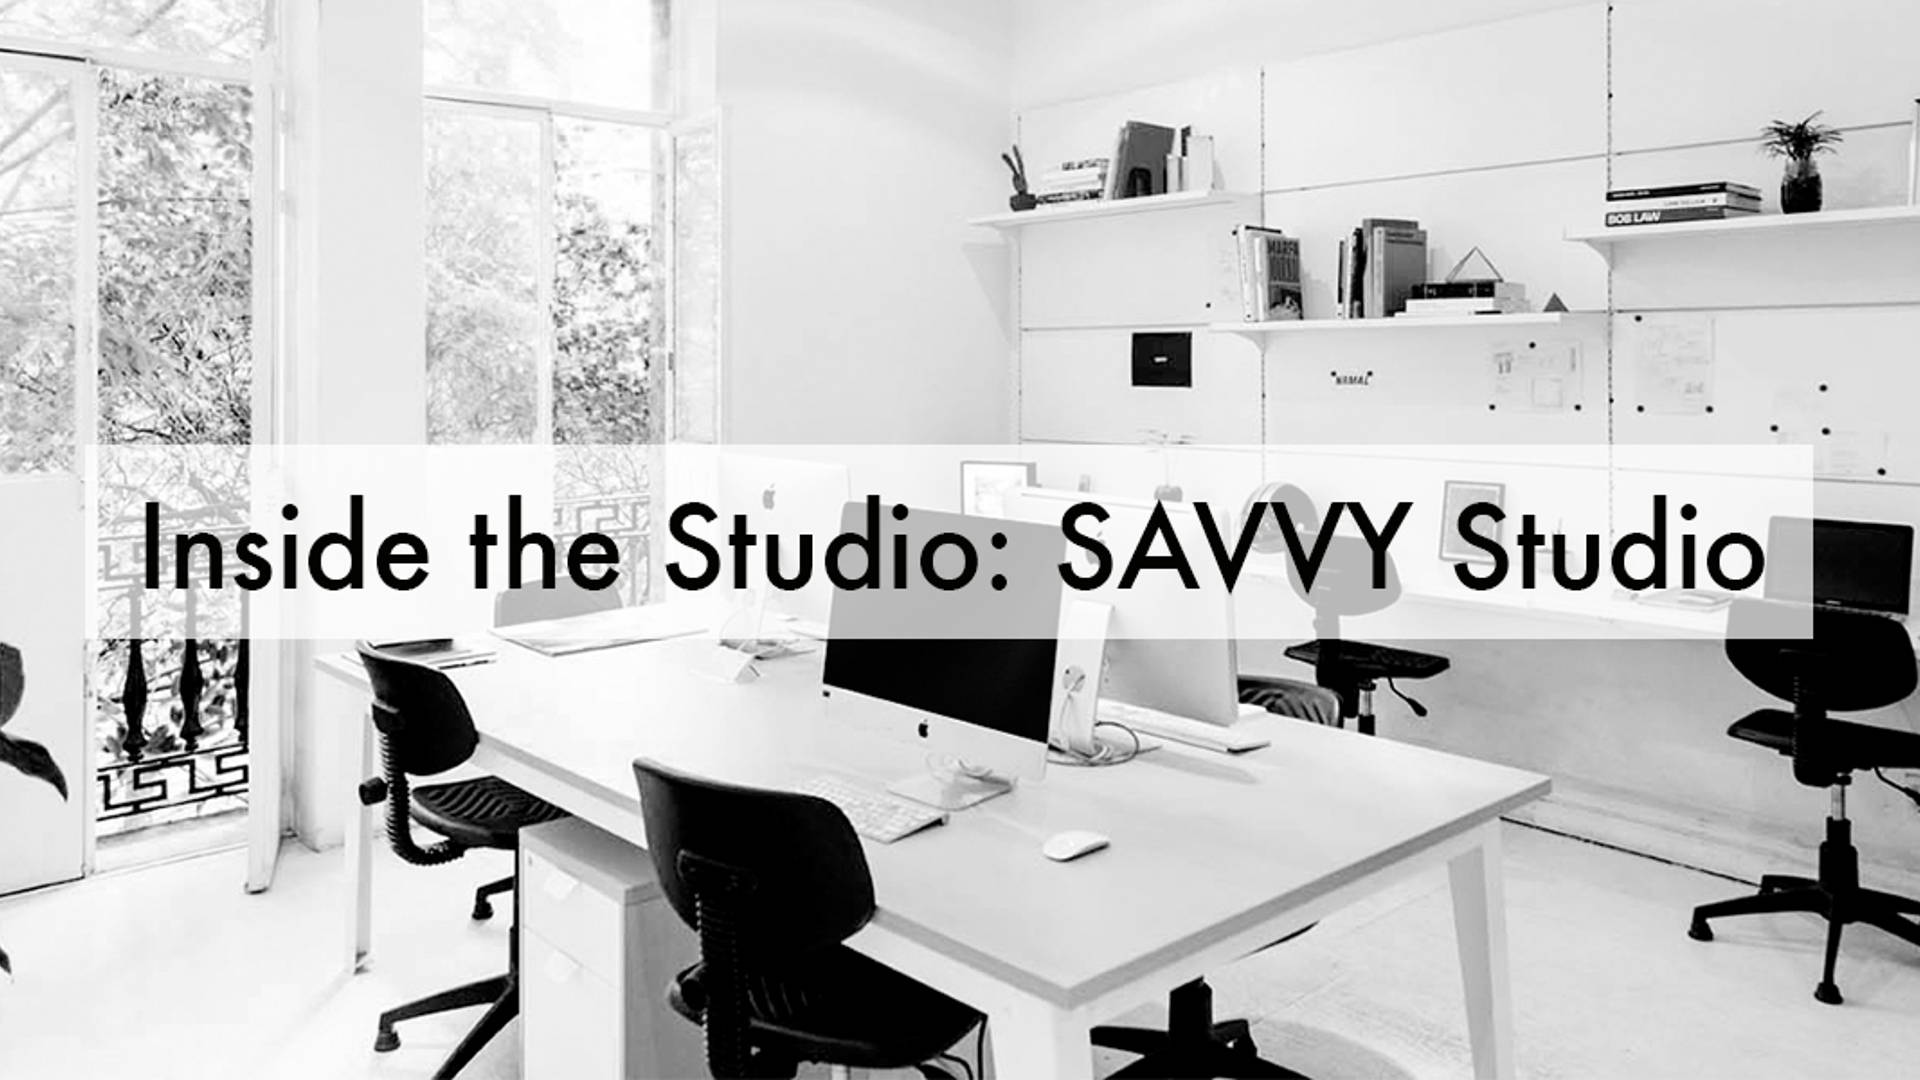 Featured image for Inside the Studio: SAVVY Studio